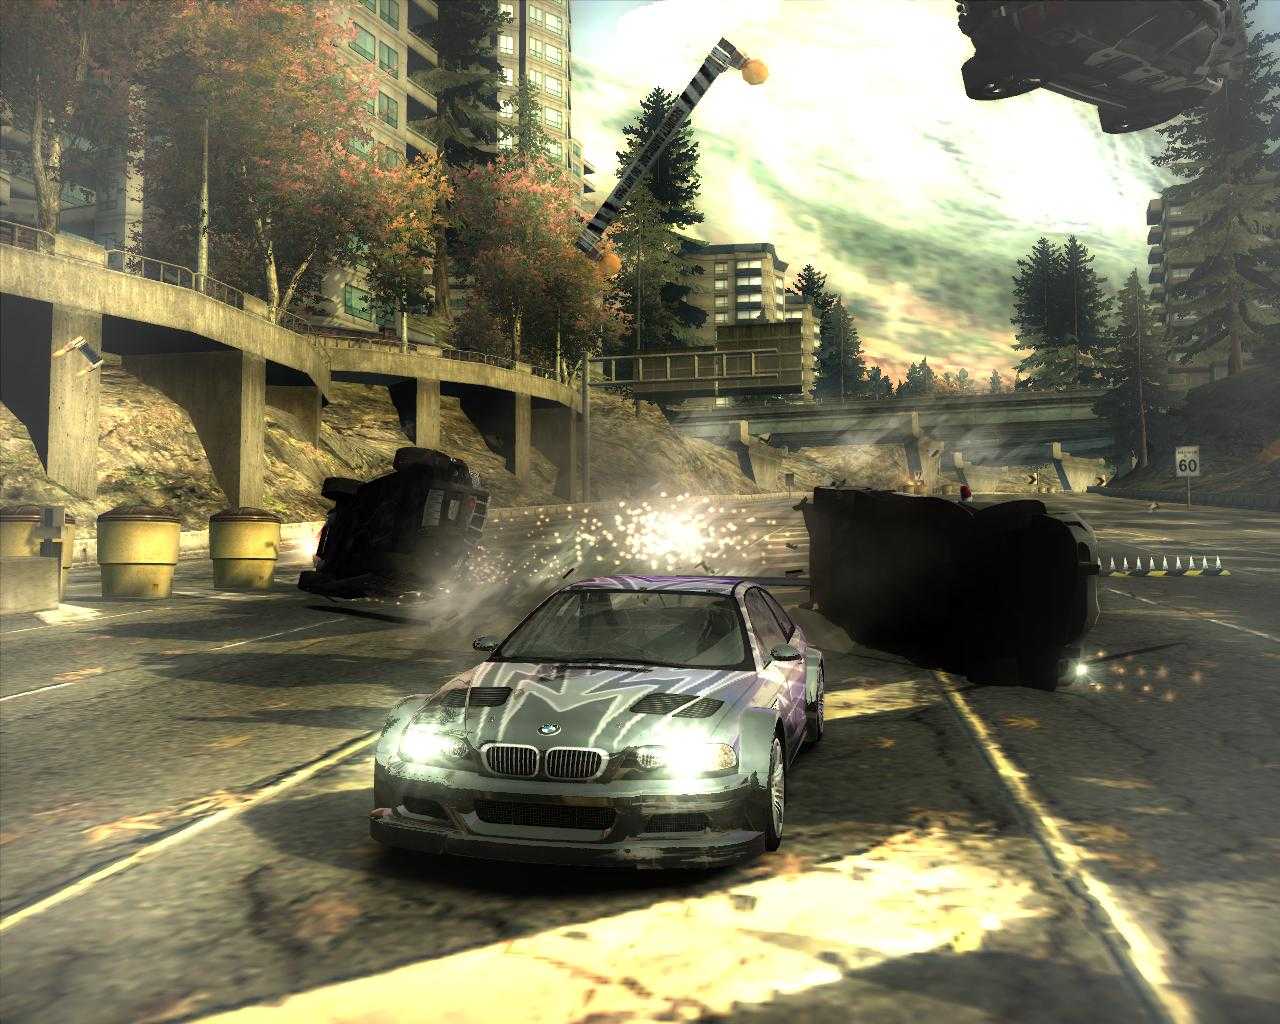 Nfs игра гонки. Игра NFS most wanted 2005. Нфс мост вантед 2005. Гонки NFS most wanted 2005. NFS мост вантед 2005.